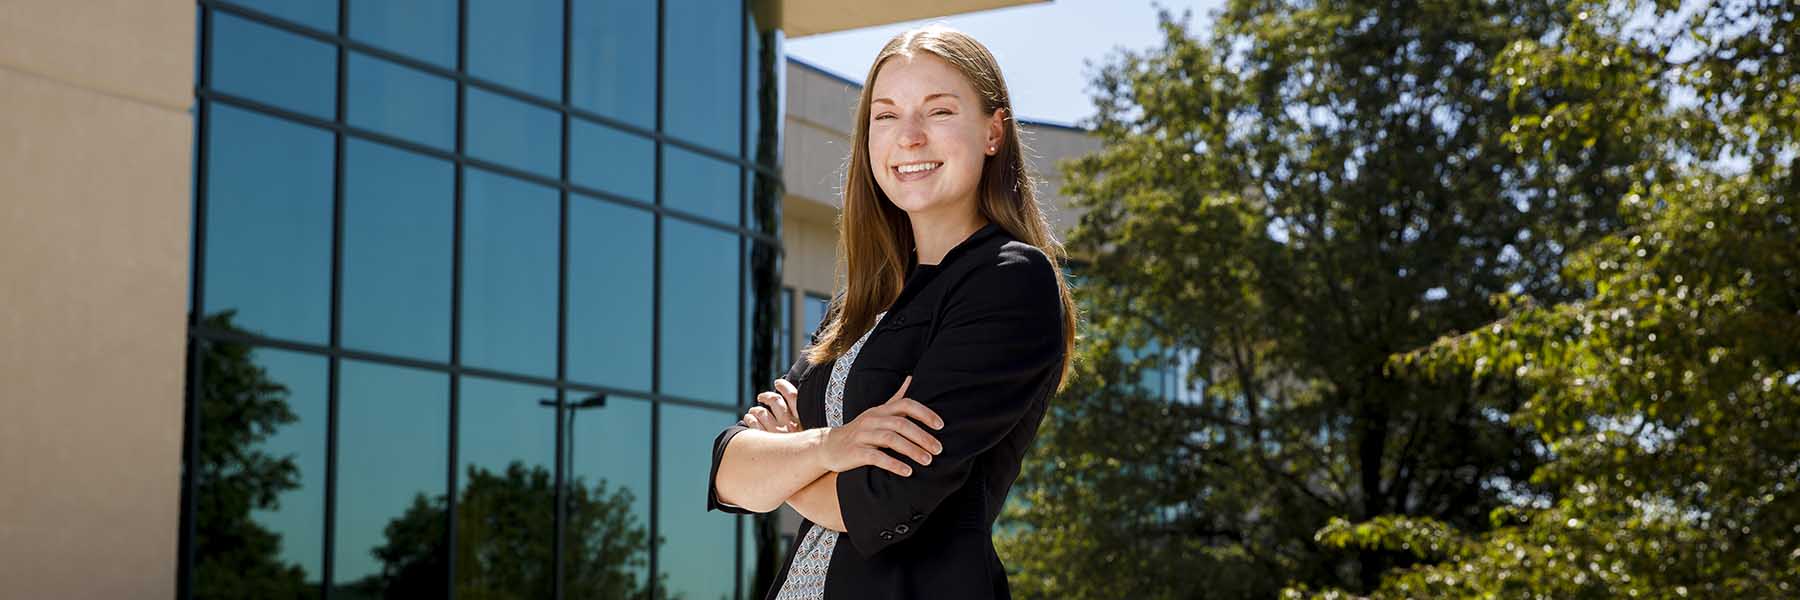 Smiling woman in professional attire smiles in a business park setting. 